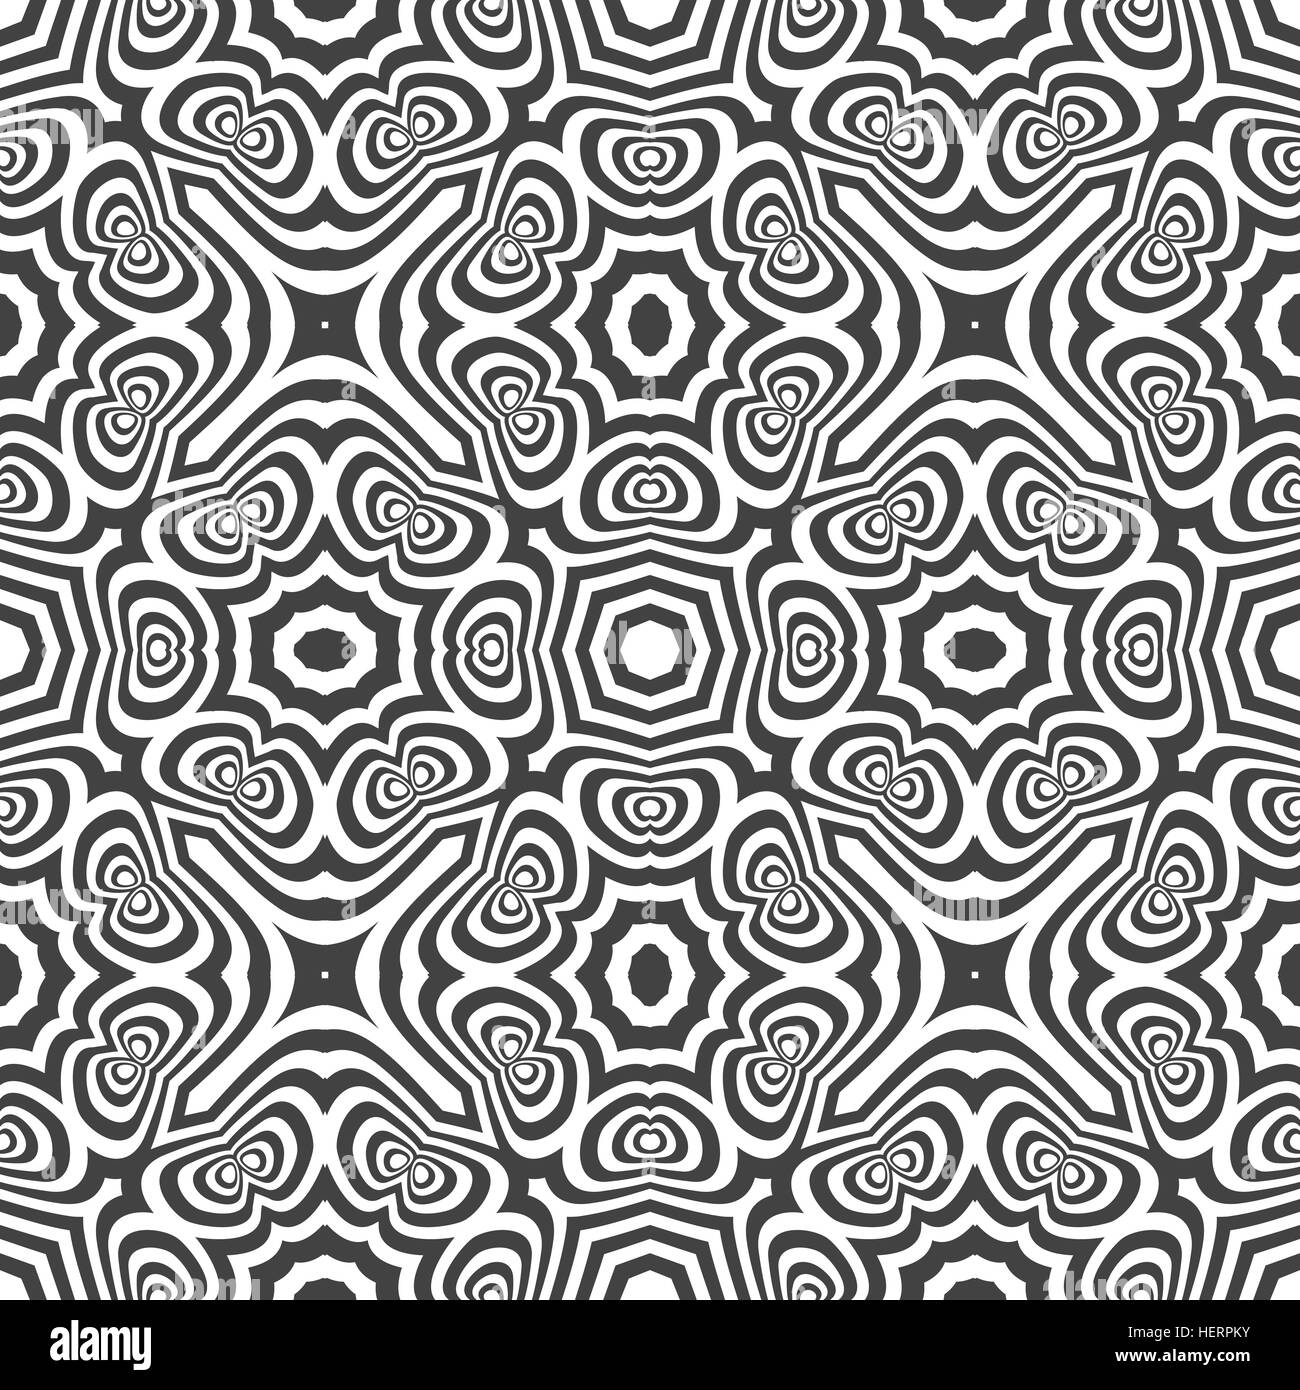 vector monochrome dark abstract optical art psychedelic illusion design decoration seamless pattern isolated white background Stock Vector